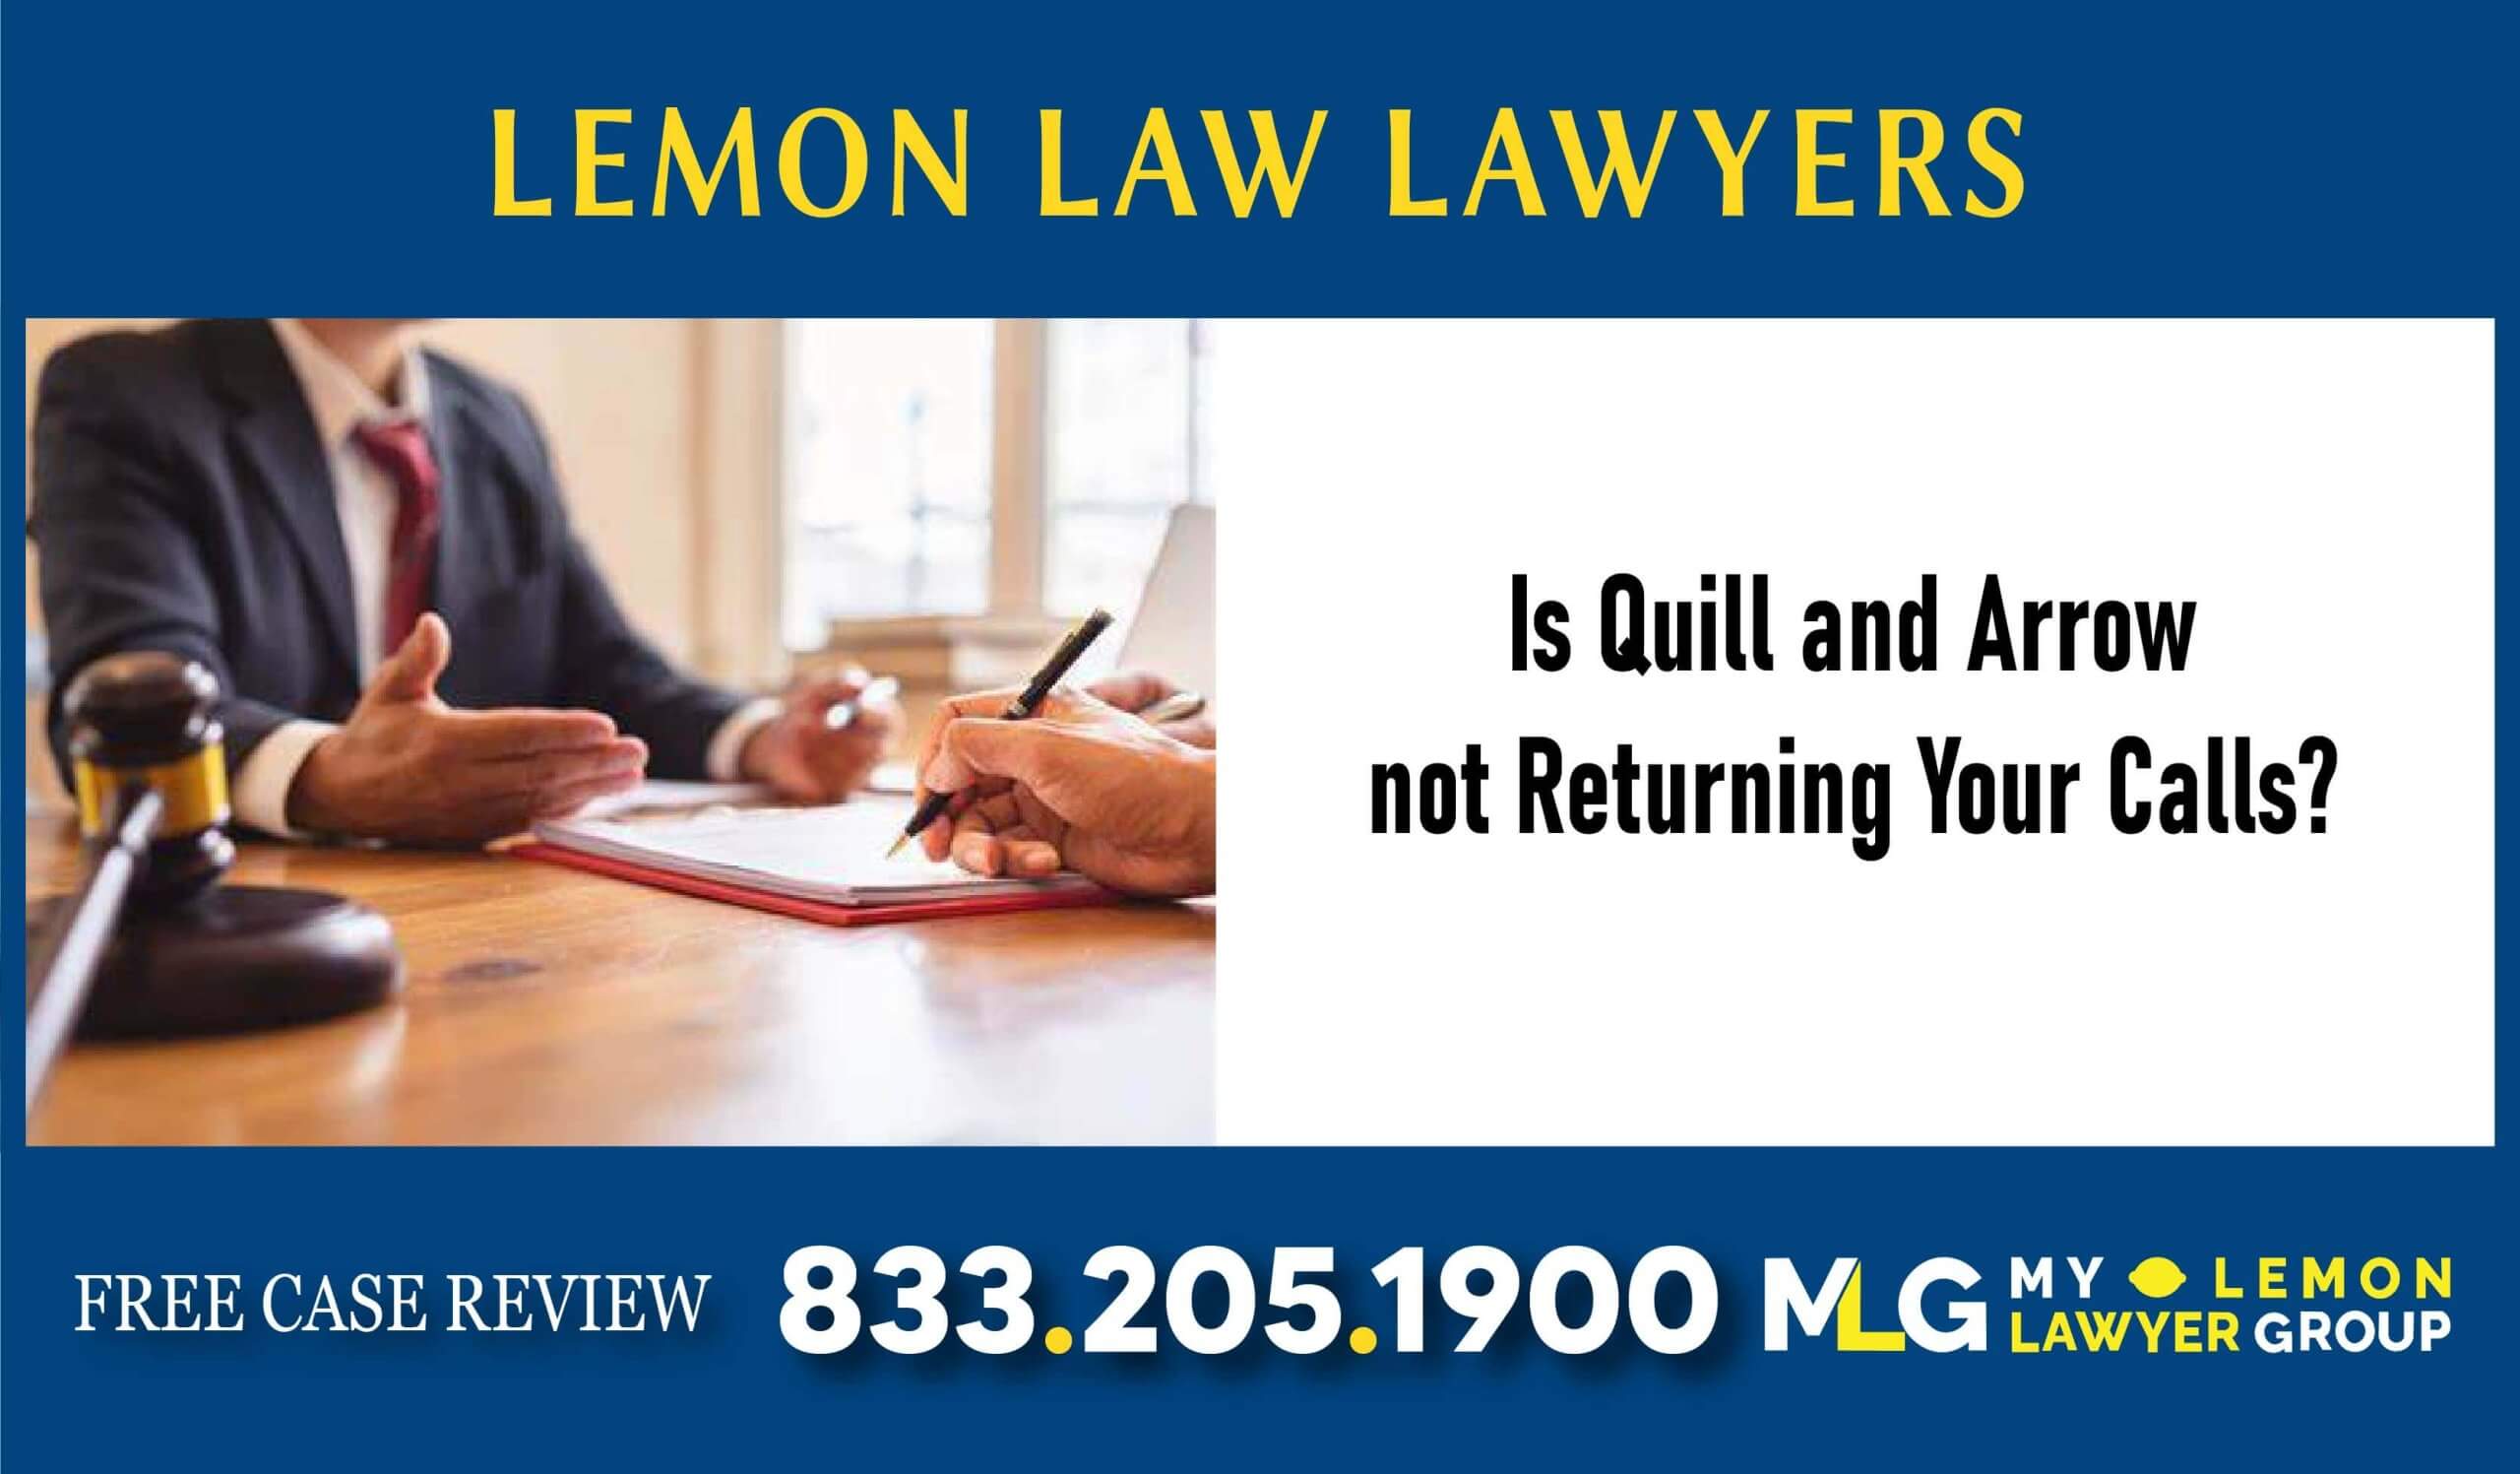 Is-Quill-and-Arrow-not-Returning-Your-Calls--Contact-Us-for-a-Free-Second-Opinion-of-Your-Lemon-Law-Case